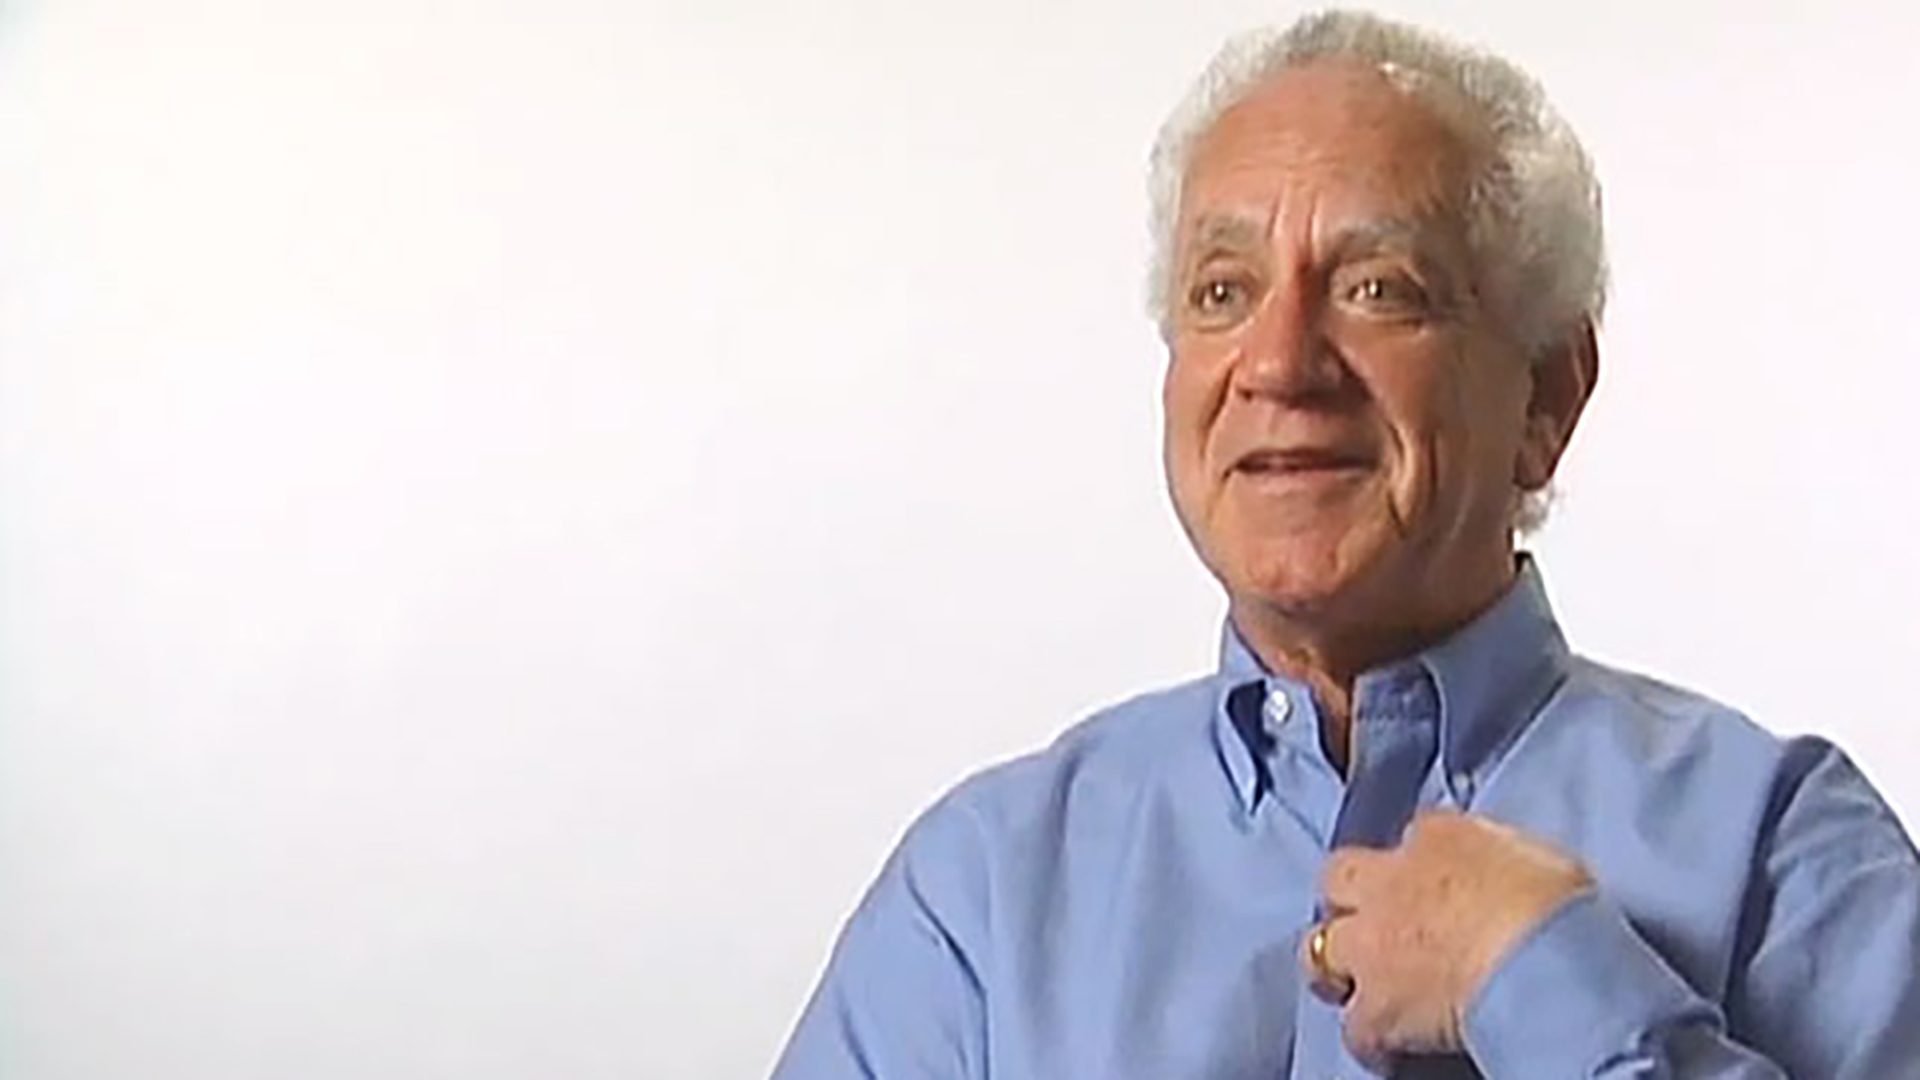 A senior man wearing a blue shirt is interviewed against a white background